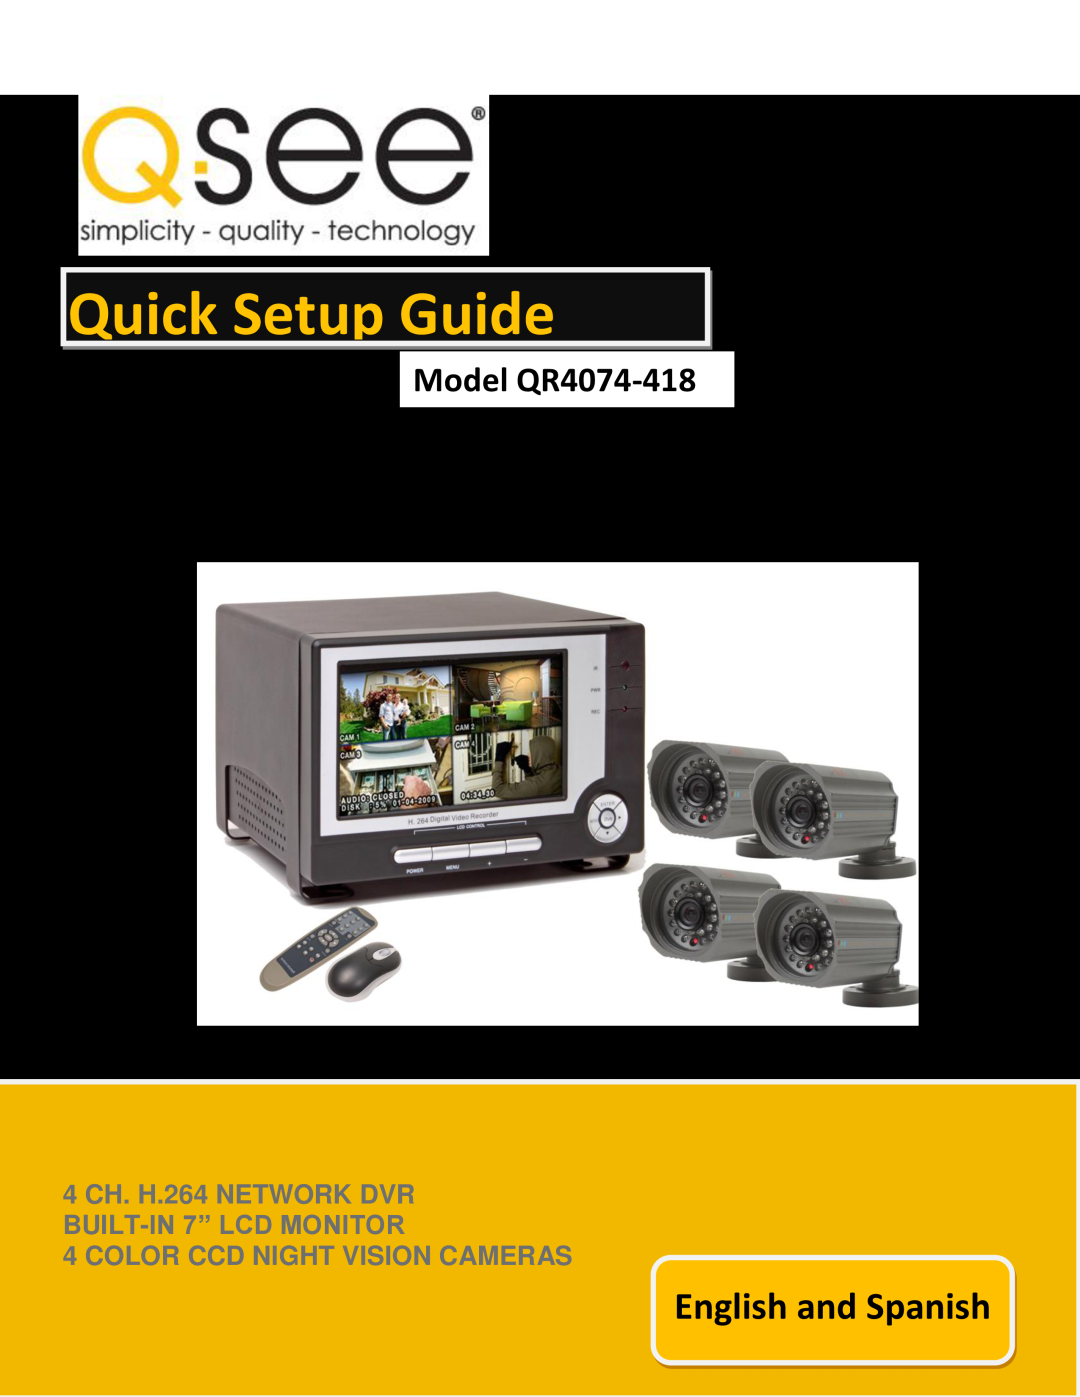 Q-See setup guide Quick Setup Guide, English and Spanish, Model QR4074-418, Color Ccd Night Vision Cameras 